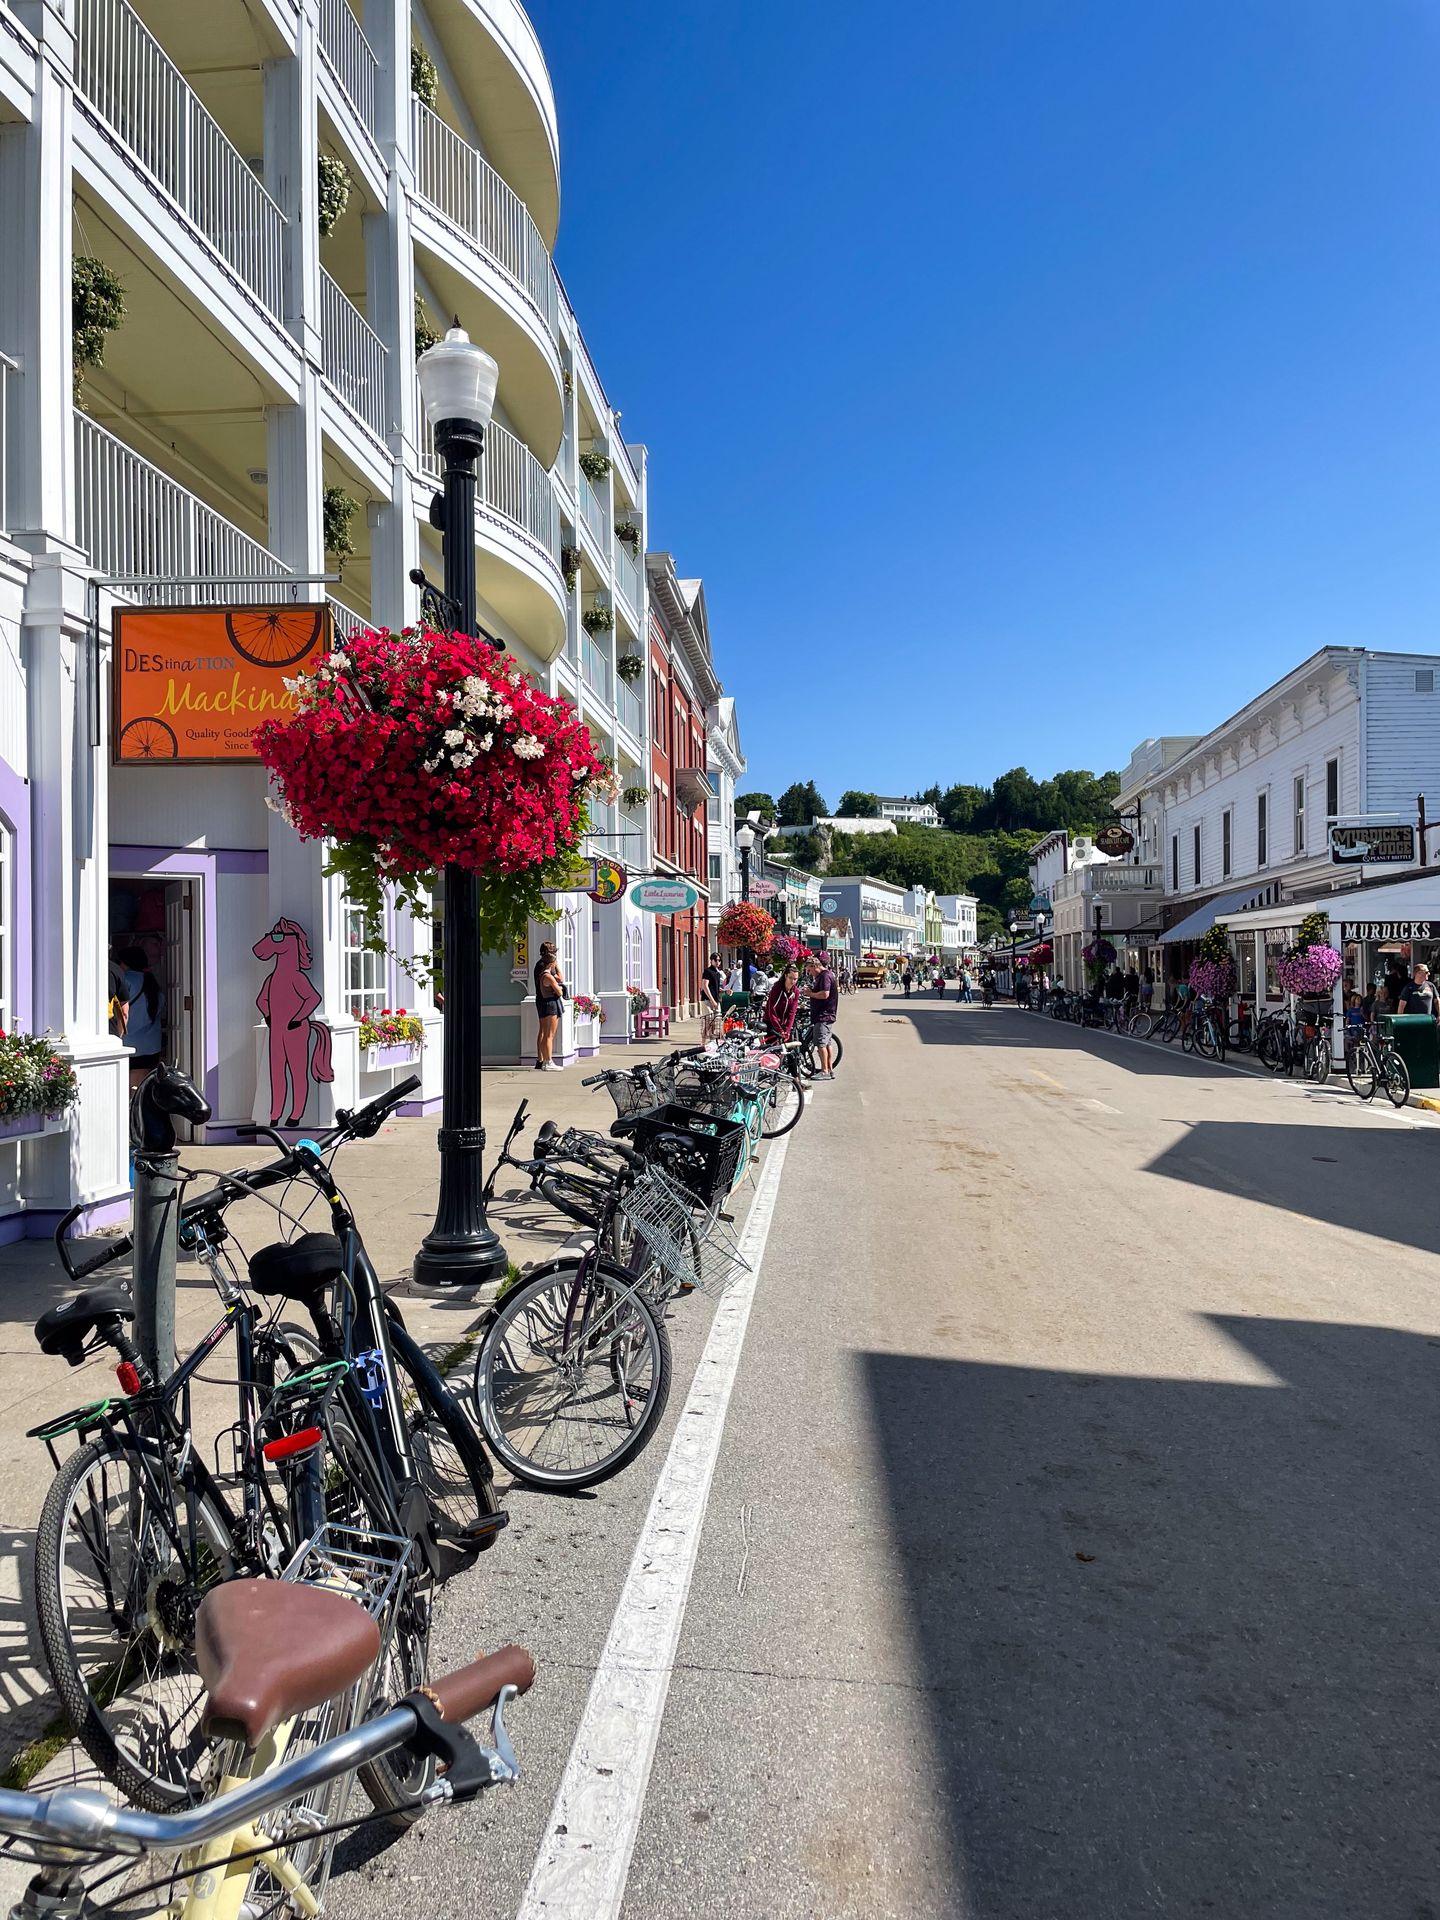 A street with bikes parked along the street in Downtown Mackinac Island.